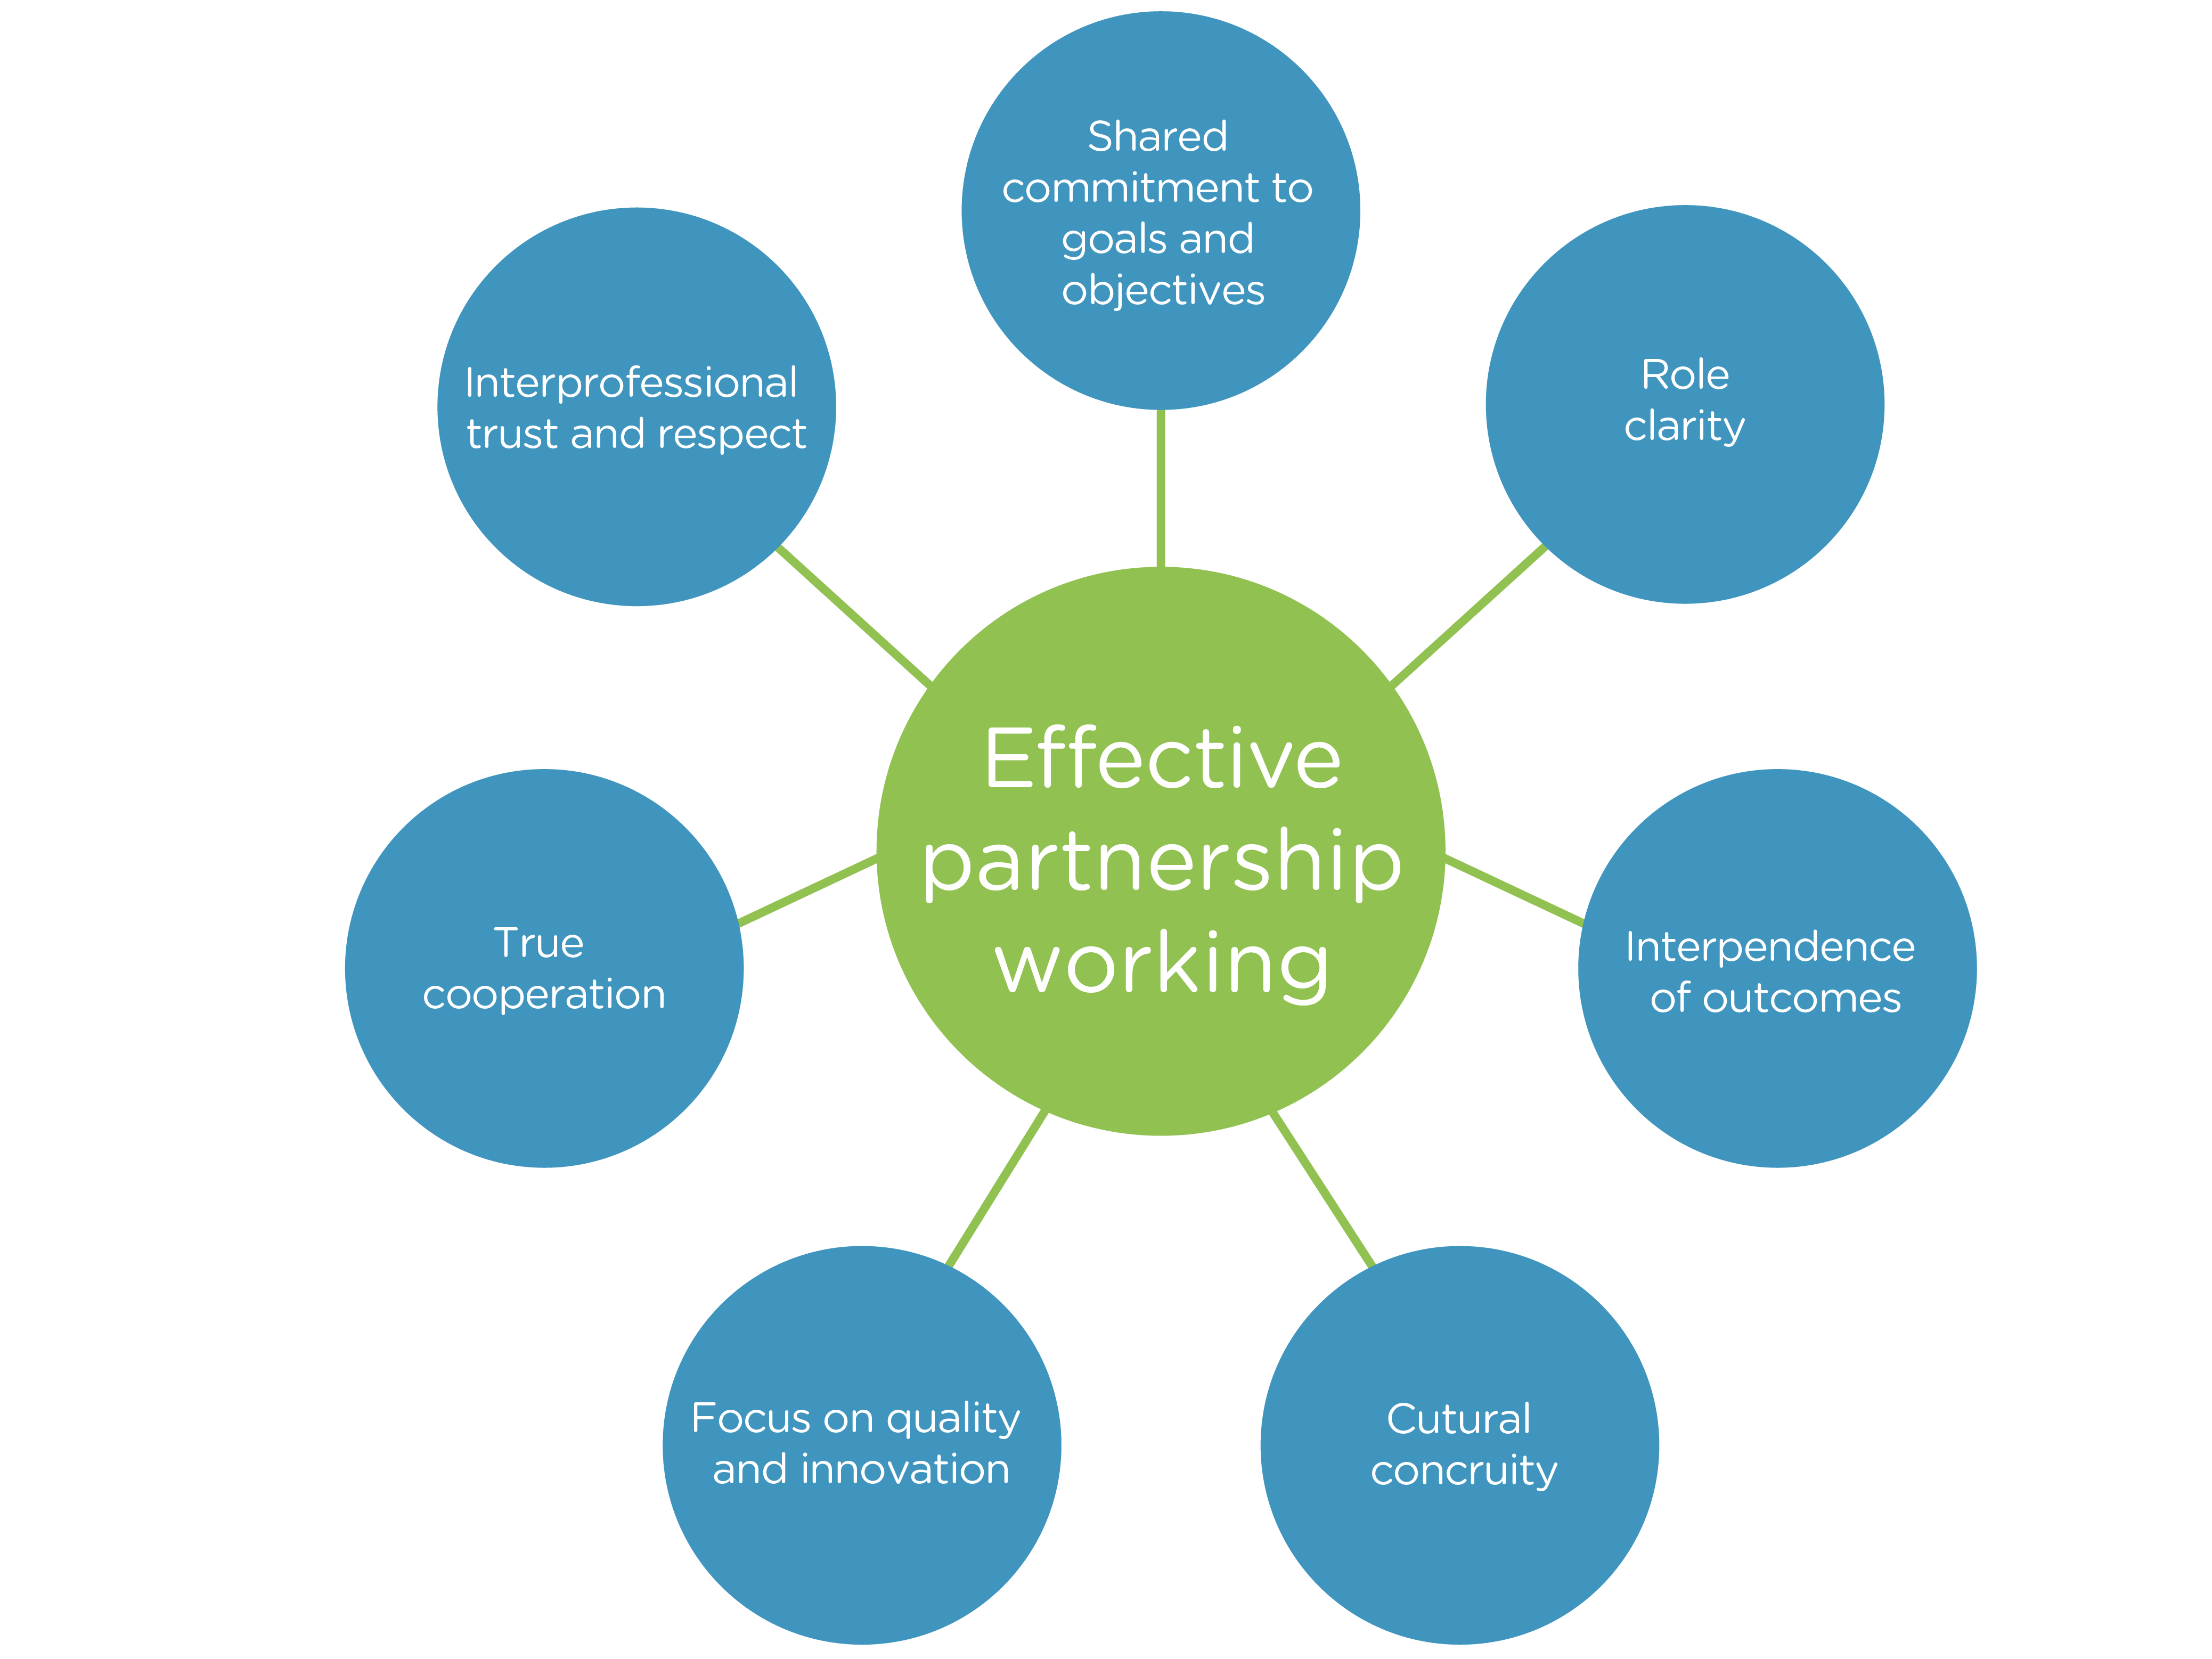 Effective partnership working is the following: Shared commitment to goals and objectives. Role clarity. Interdependence of outcomes. Cultural congruity. Focus on quality and innovation. True cooperation. Interprofessional trust and respect.